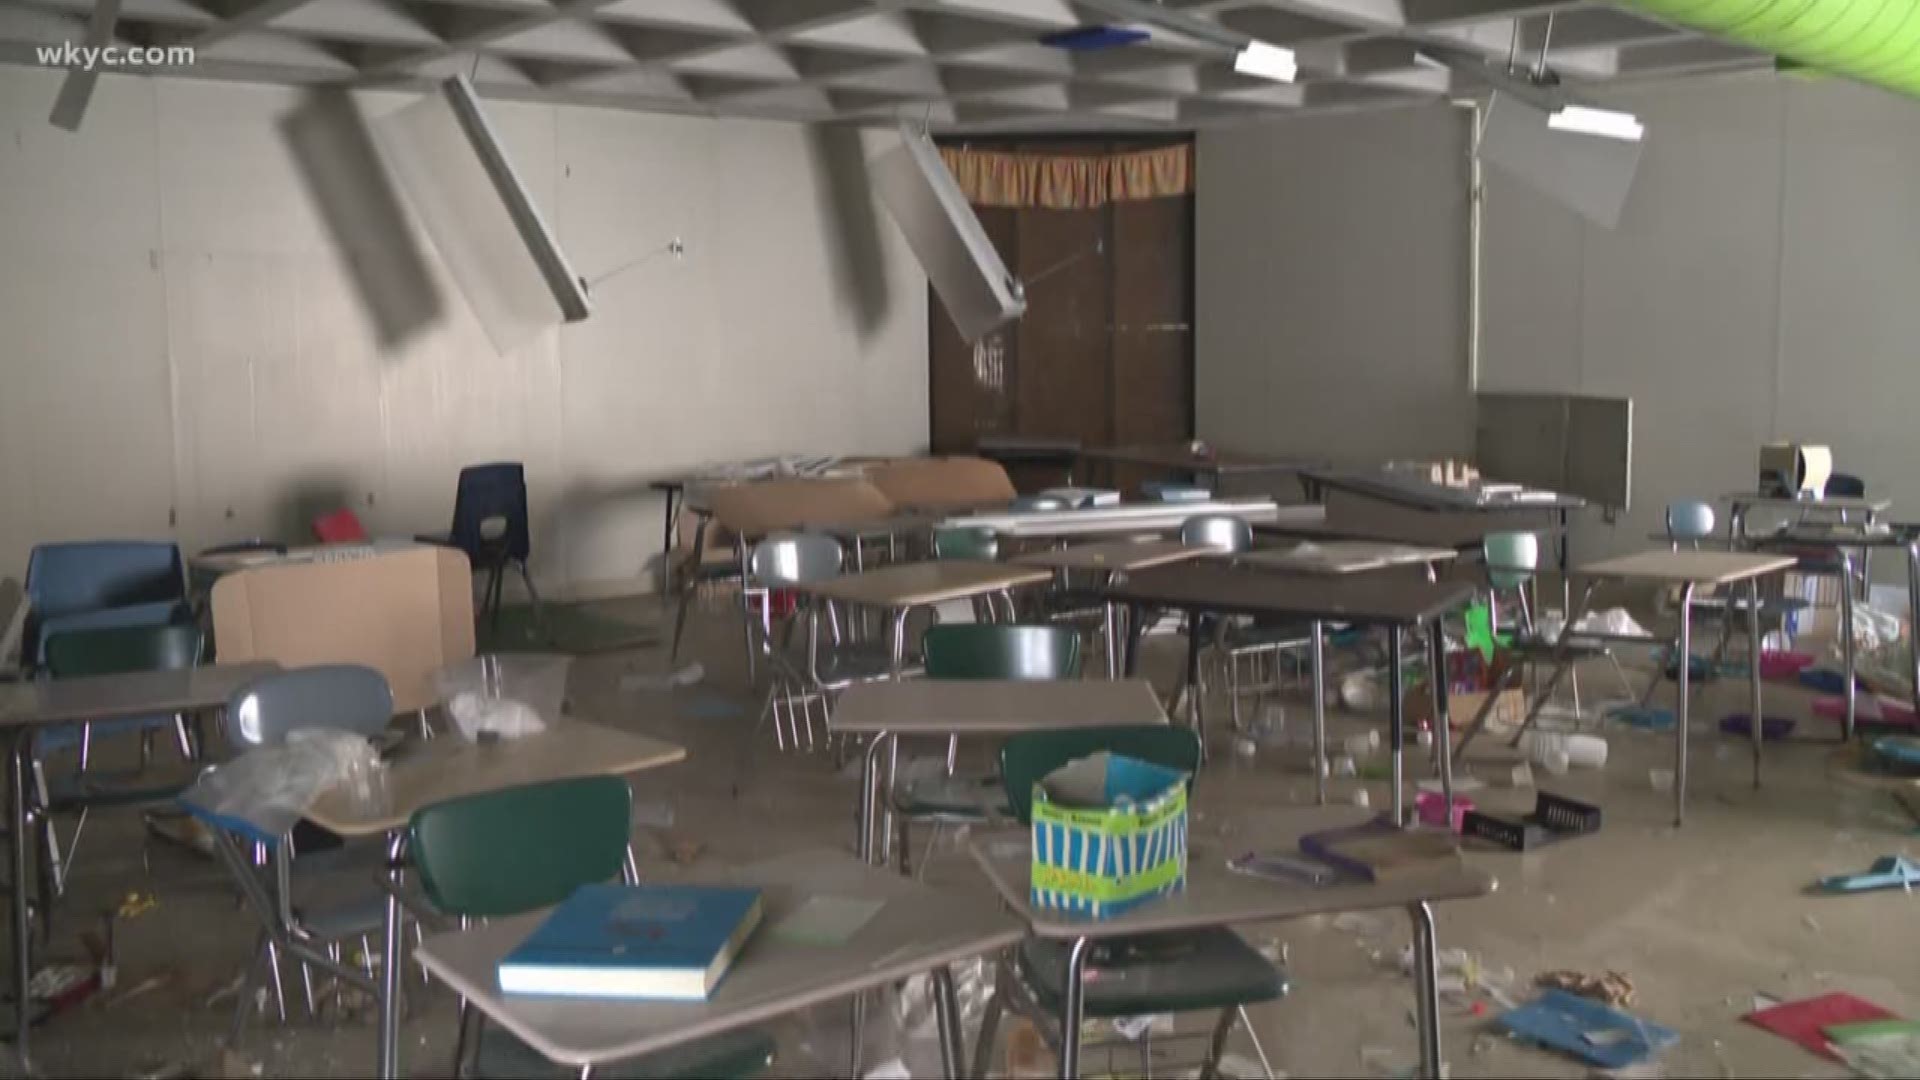 Cleveland public schools are continuing to secure their abandoned buildings weeks after a Channel 3 News investigation uncovered the district allowed thousands of items to be pillaged or left to rot, including a nearly full library of books and employee records